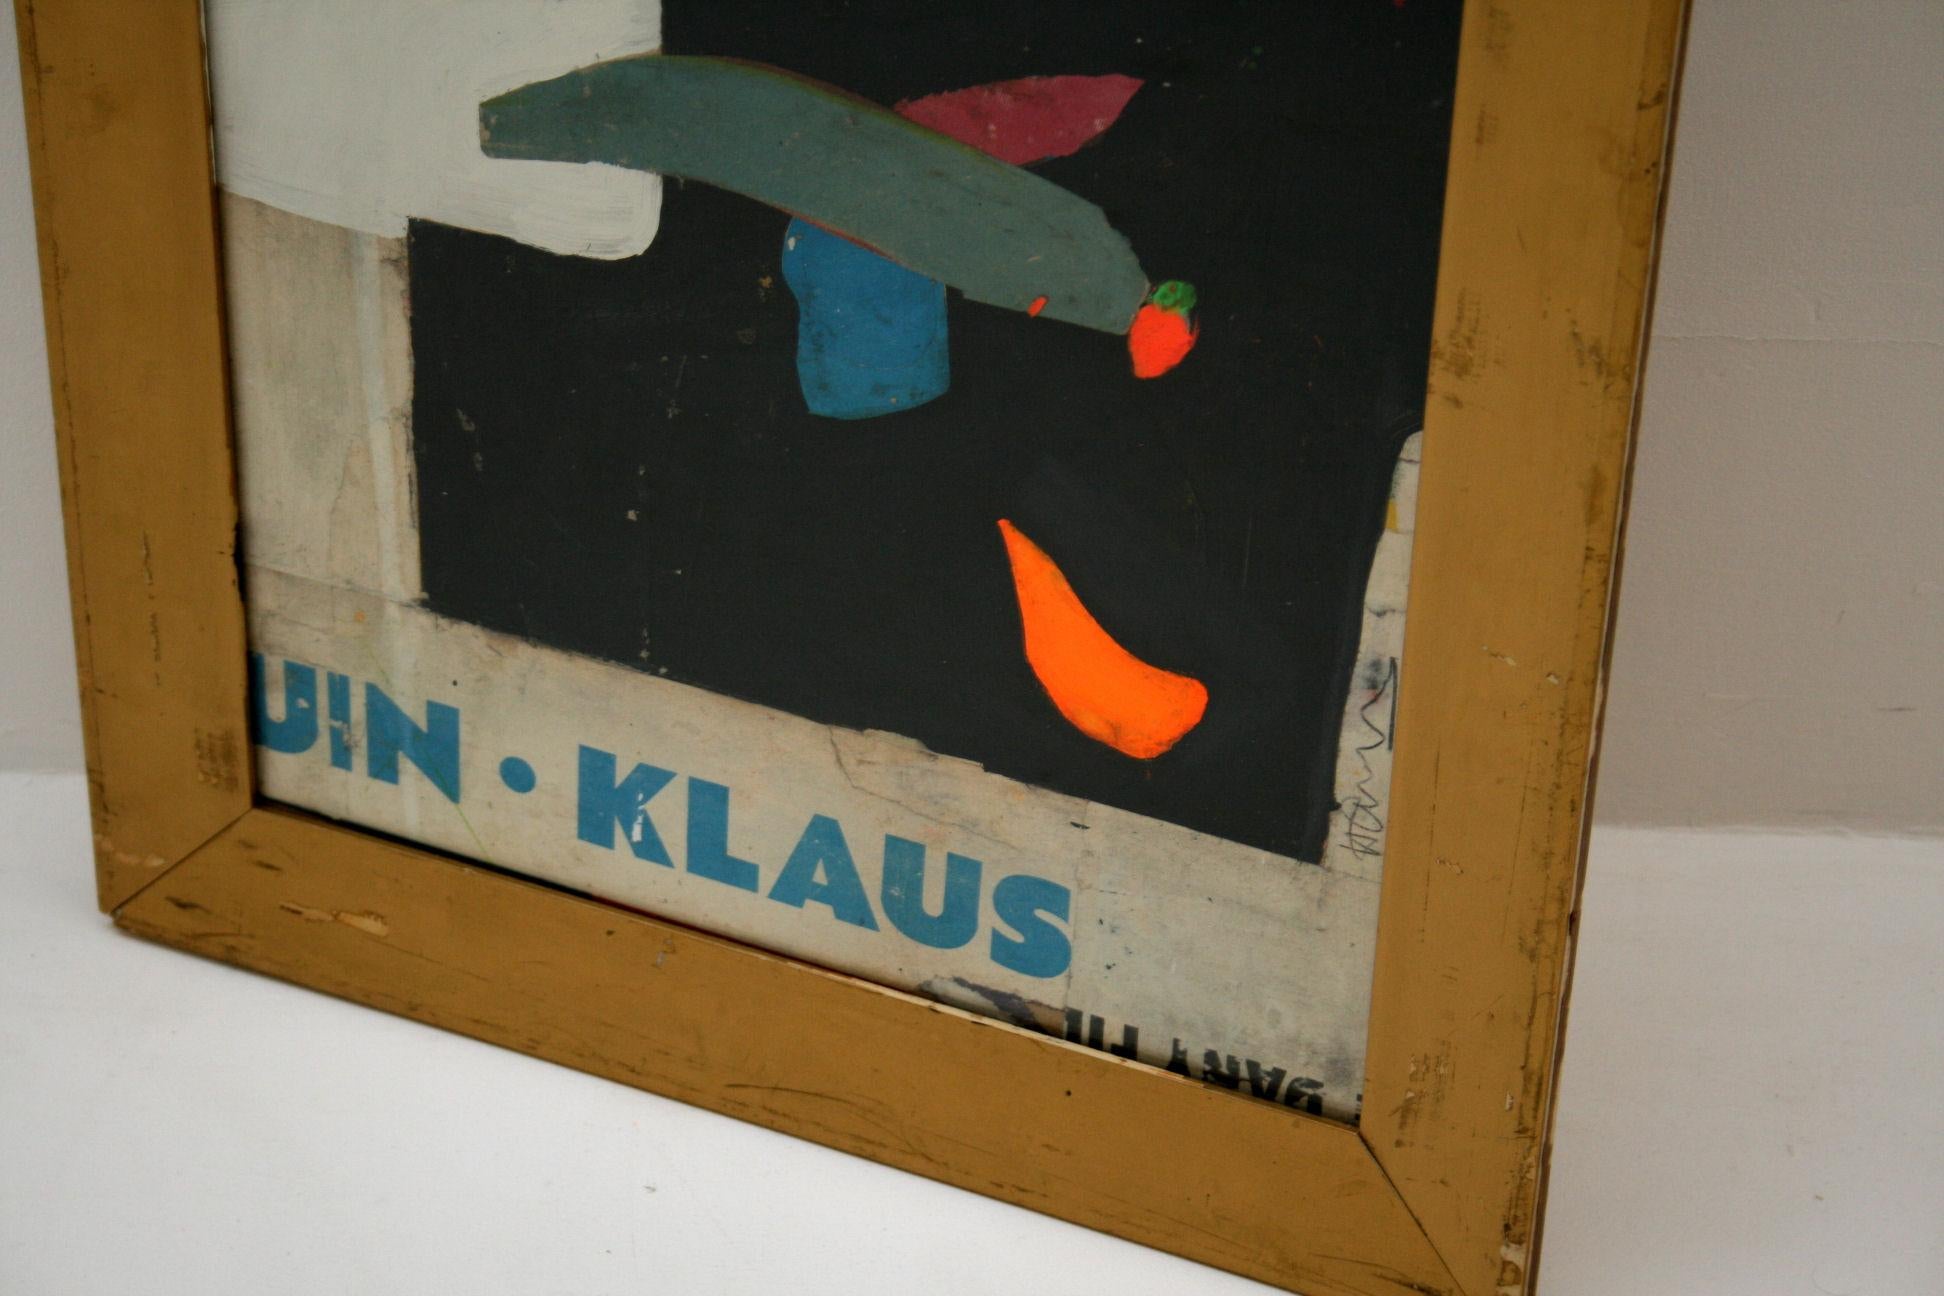 Wood Klaus by Artist Huw Griffith